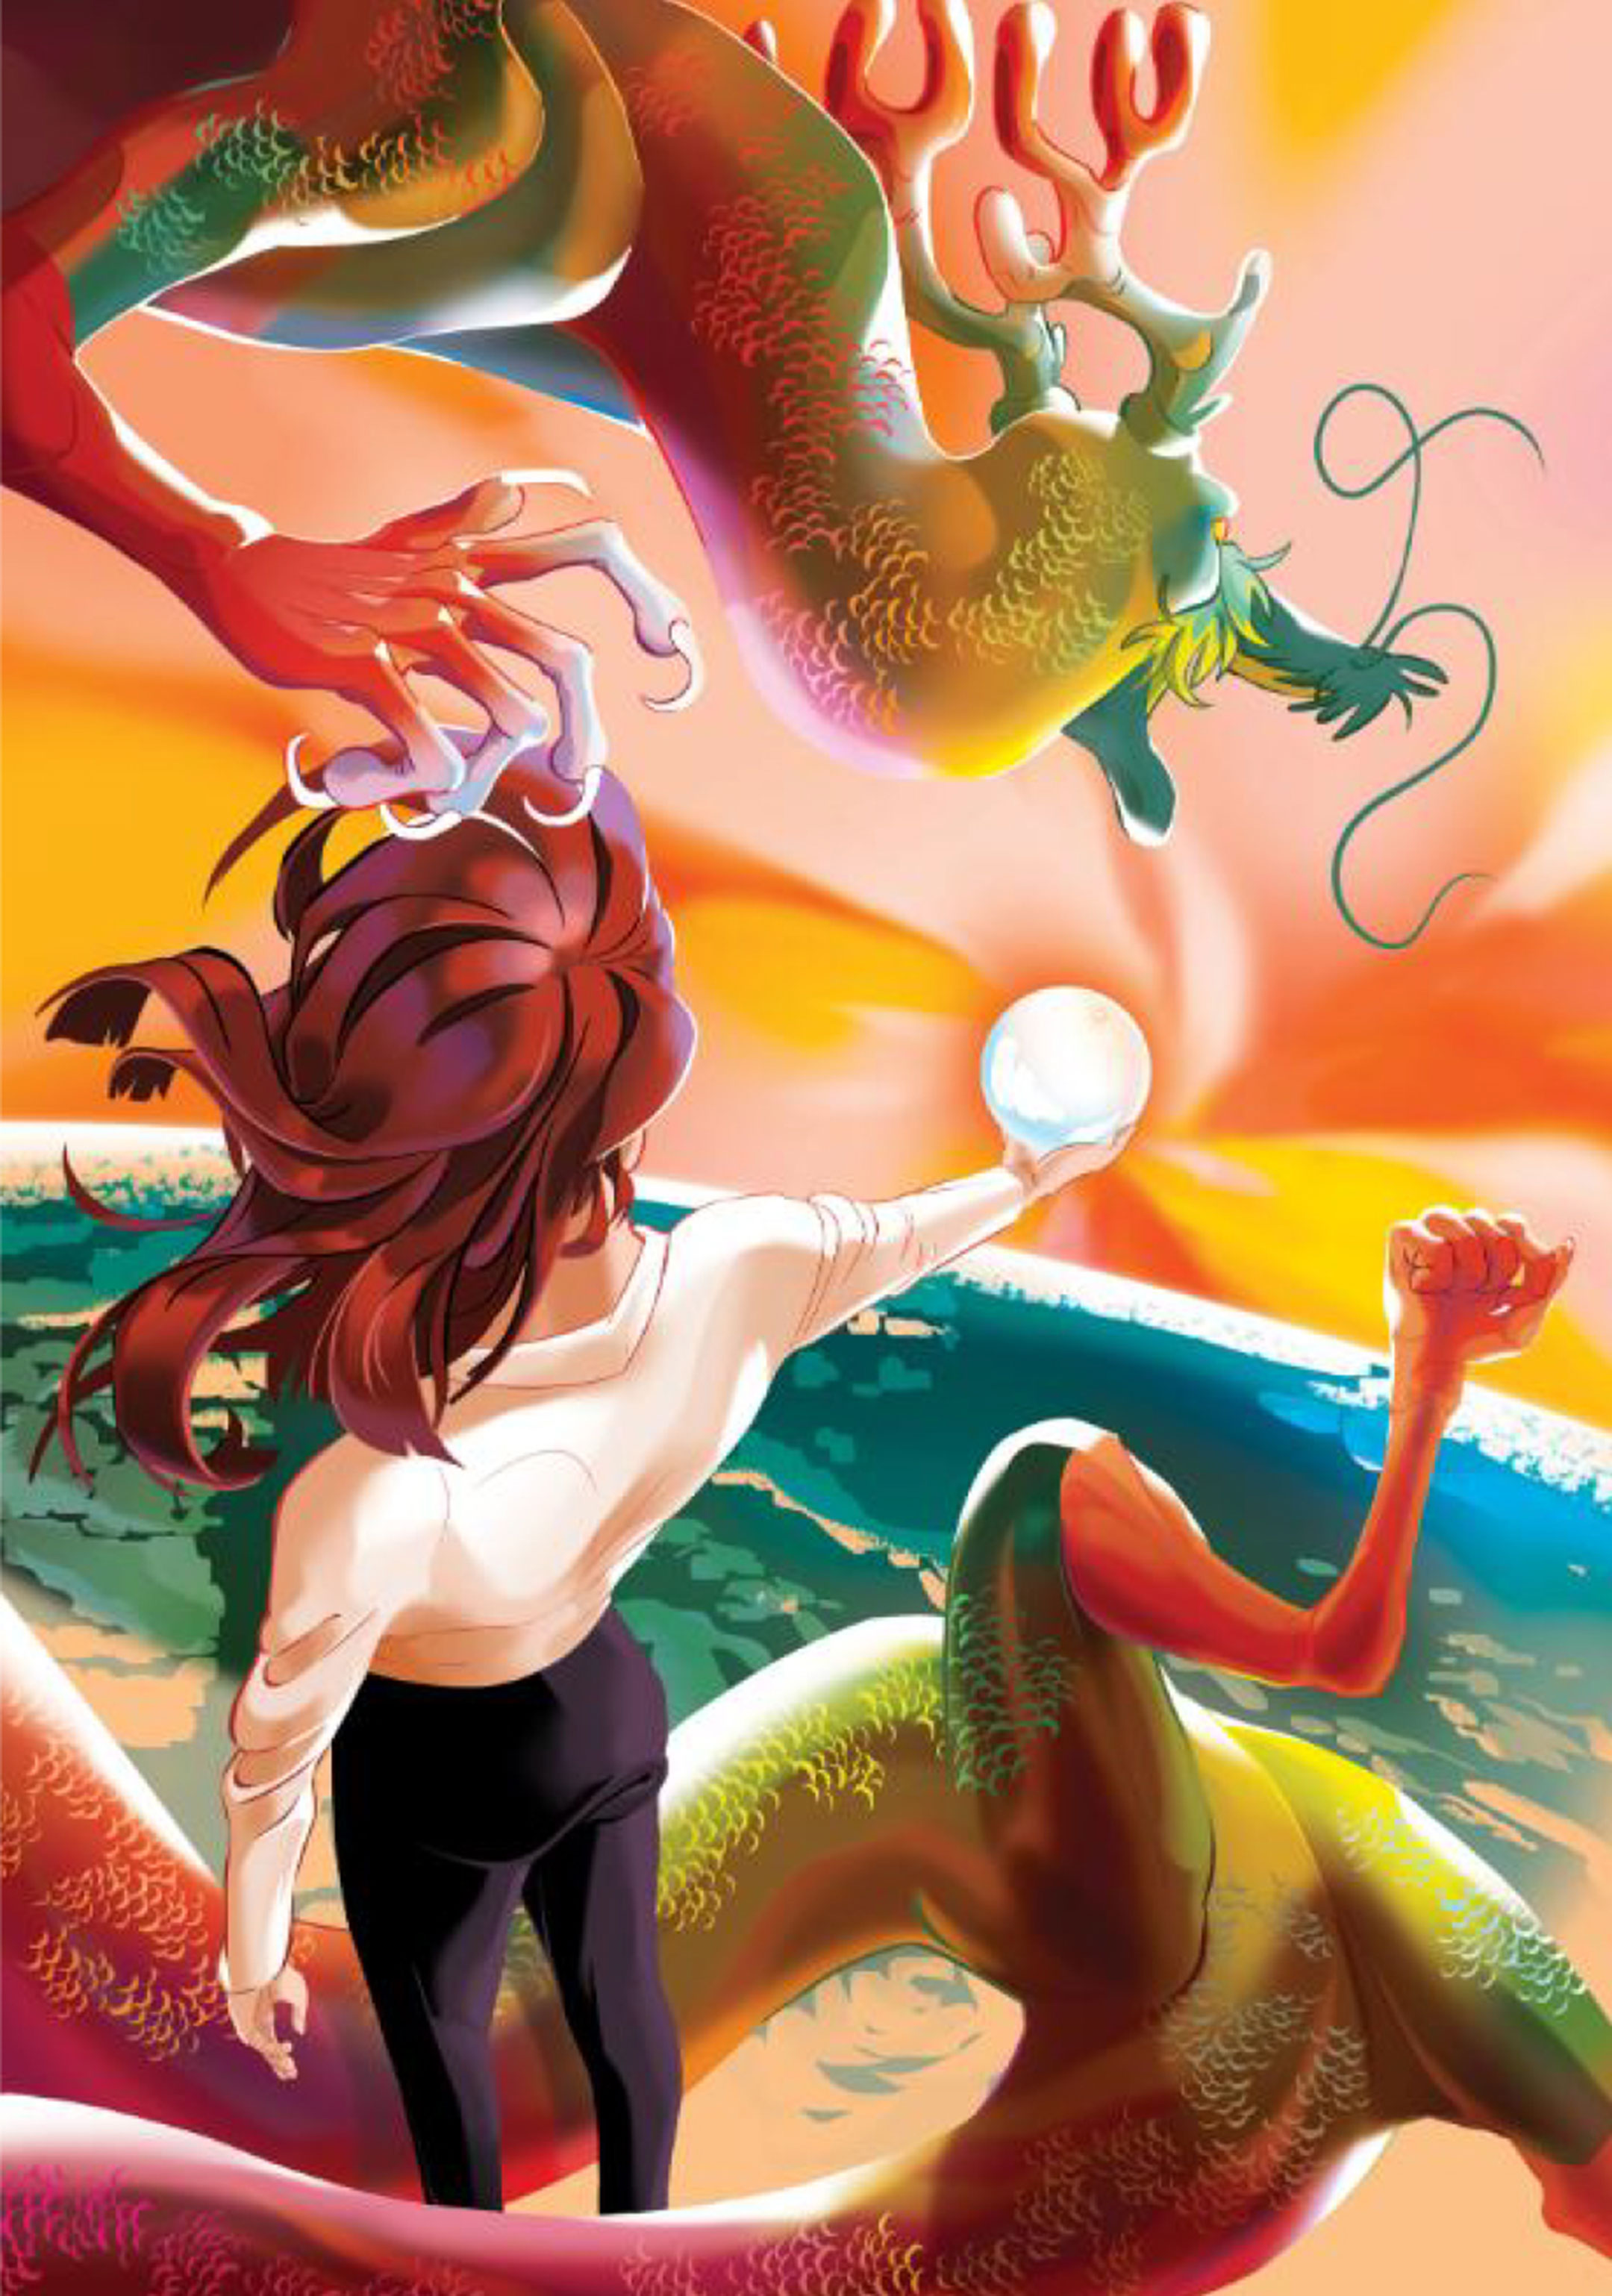 Illustration of a young woman, seen from behind, standing on a beach while holding a glowing orb as a dragon circles her